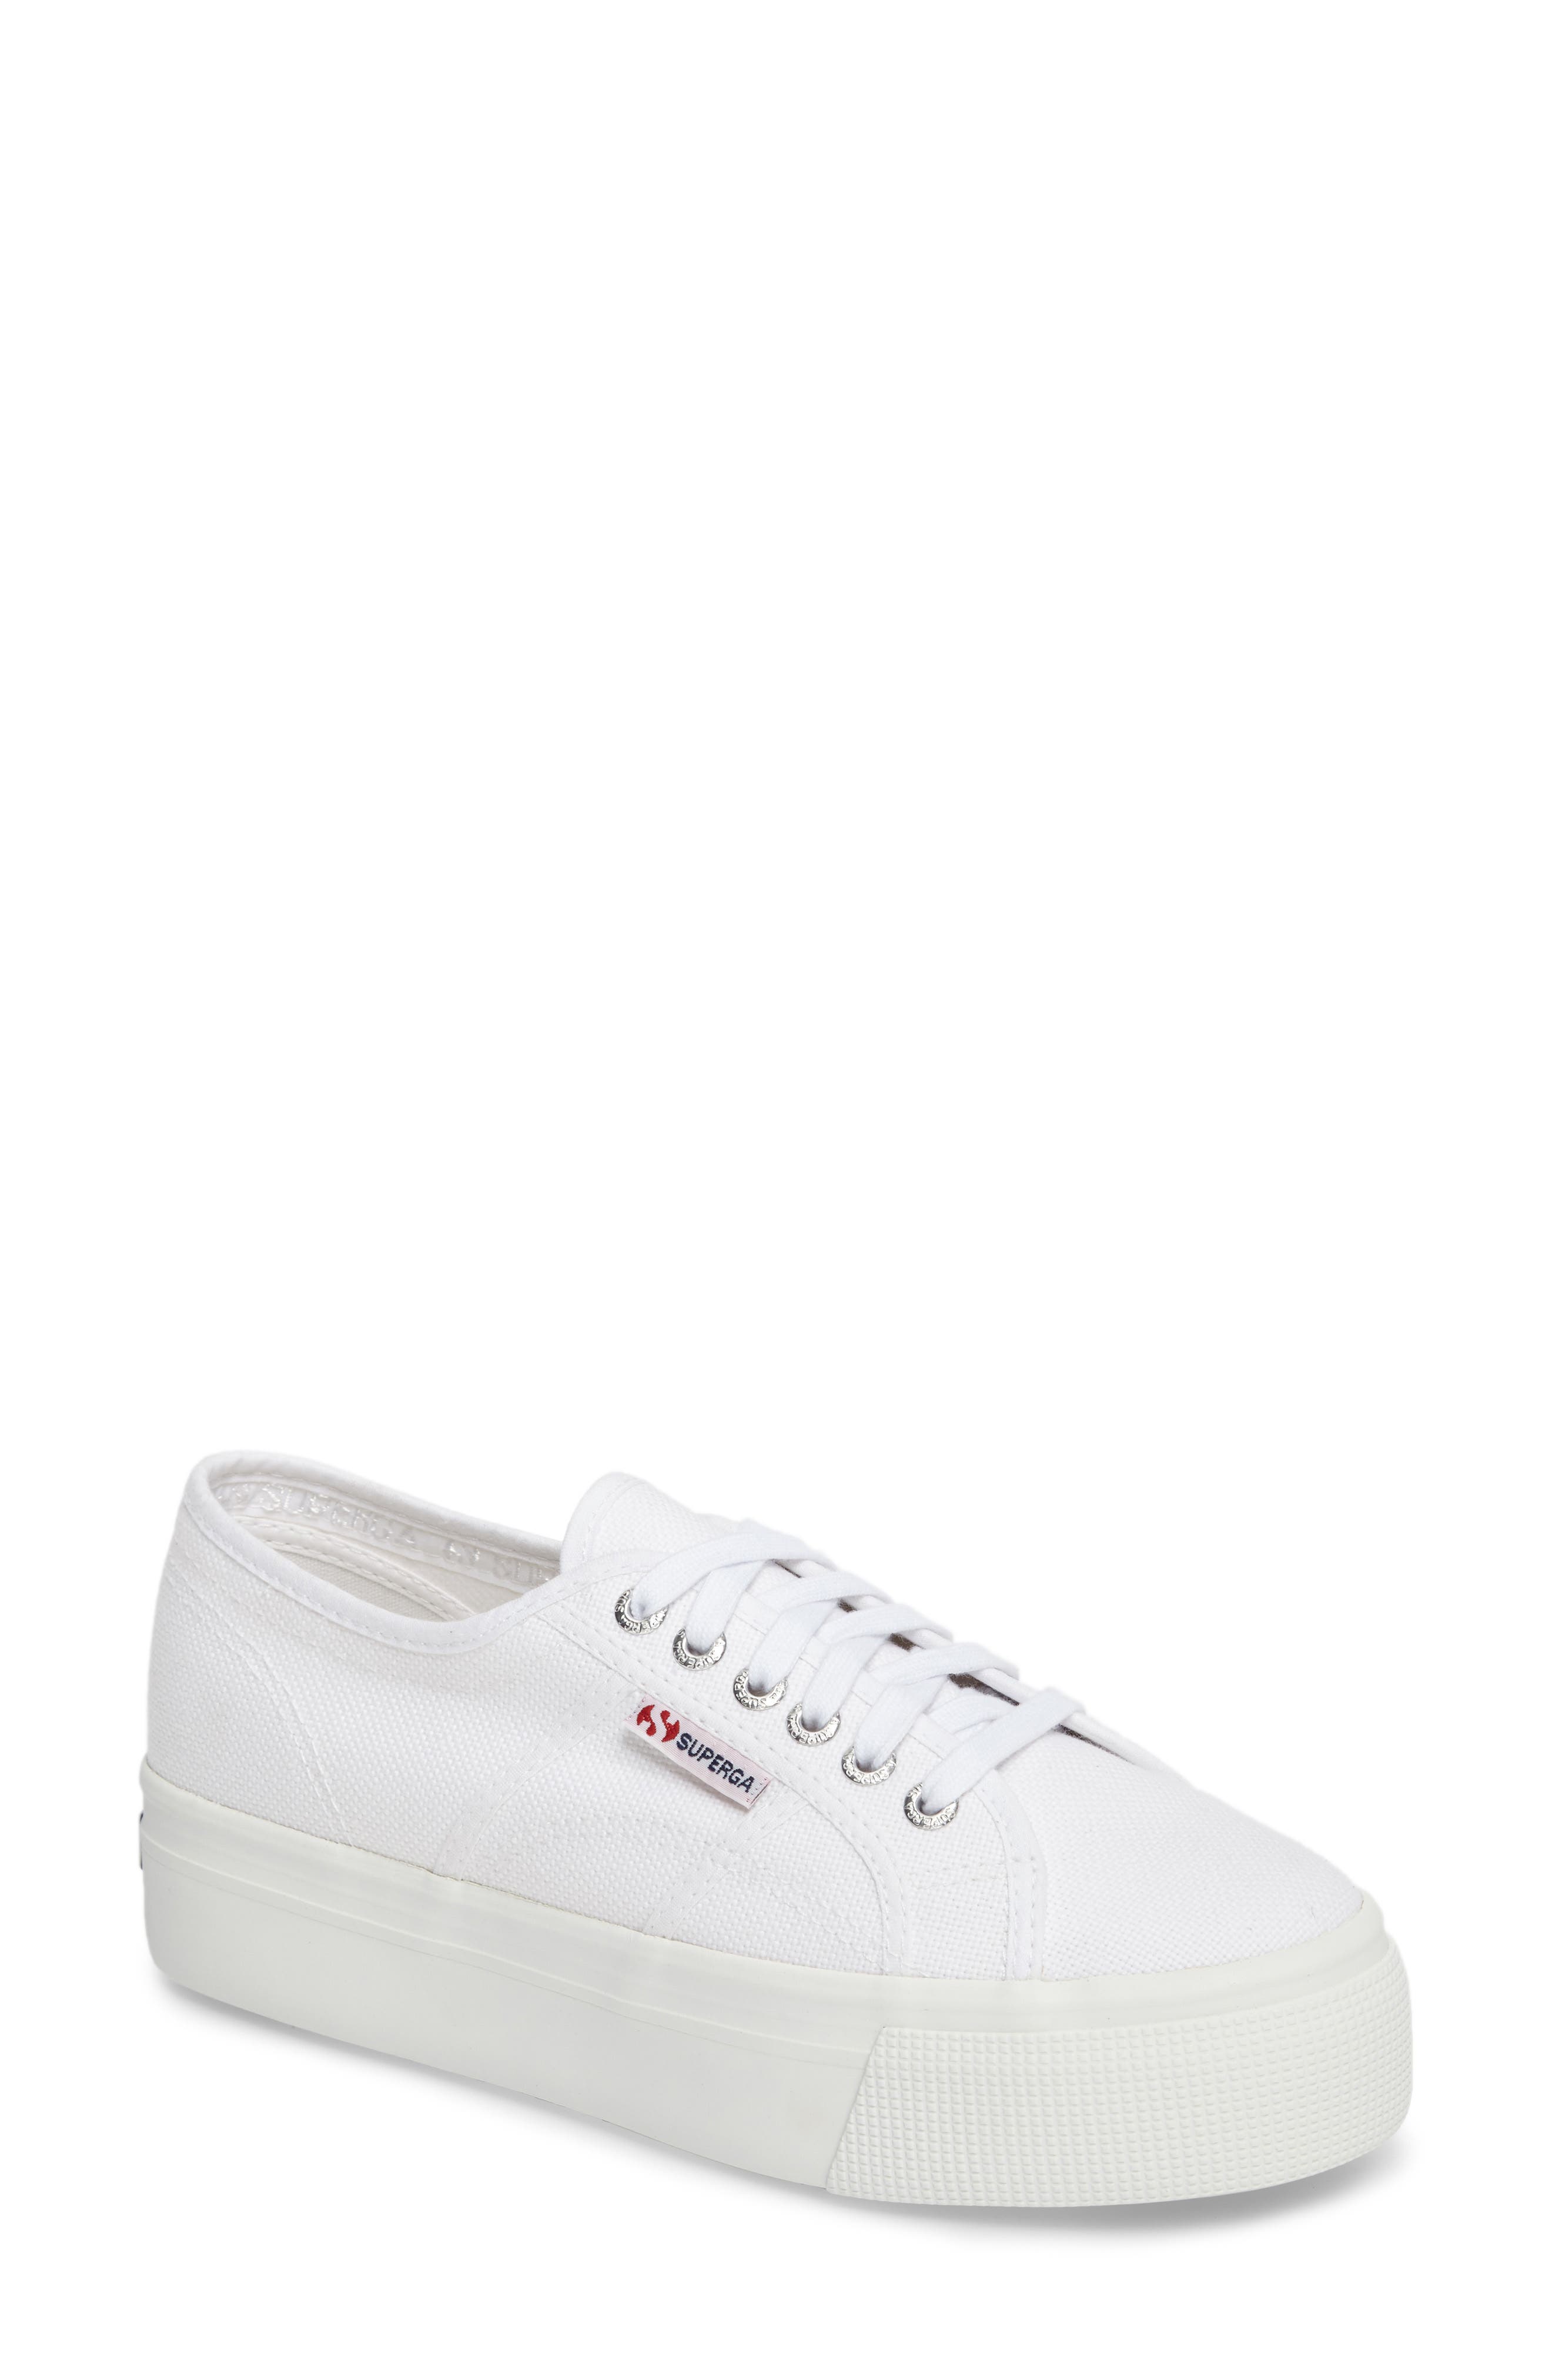 Superga Womens Trainers Low-Top Sneakers 